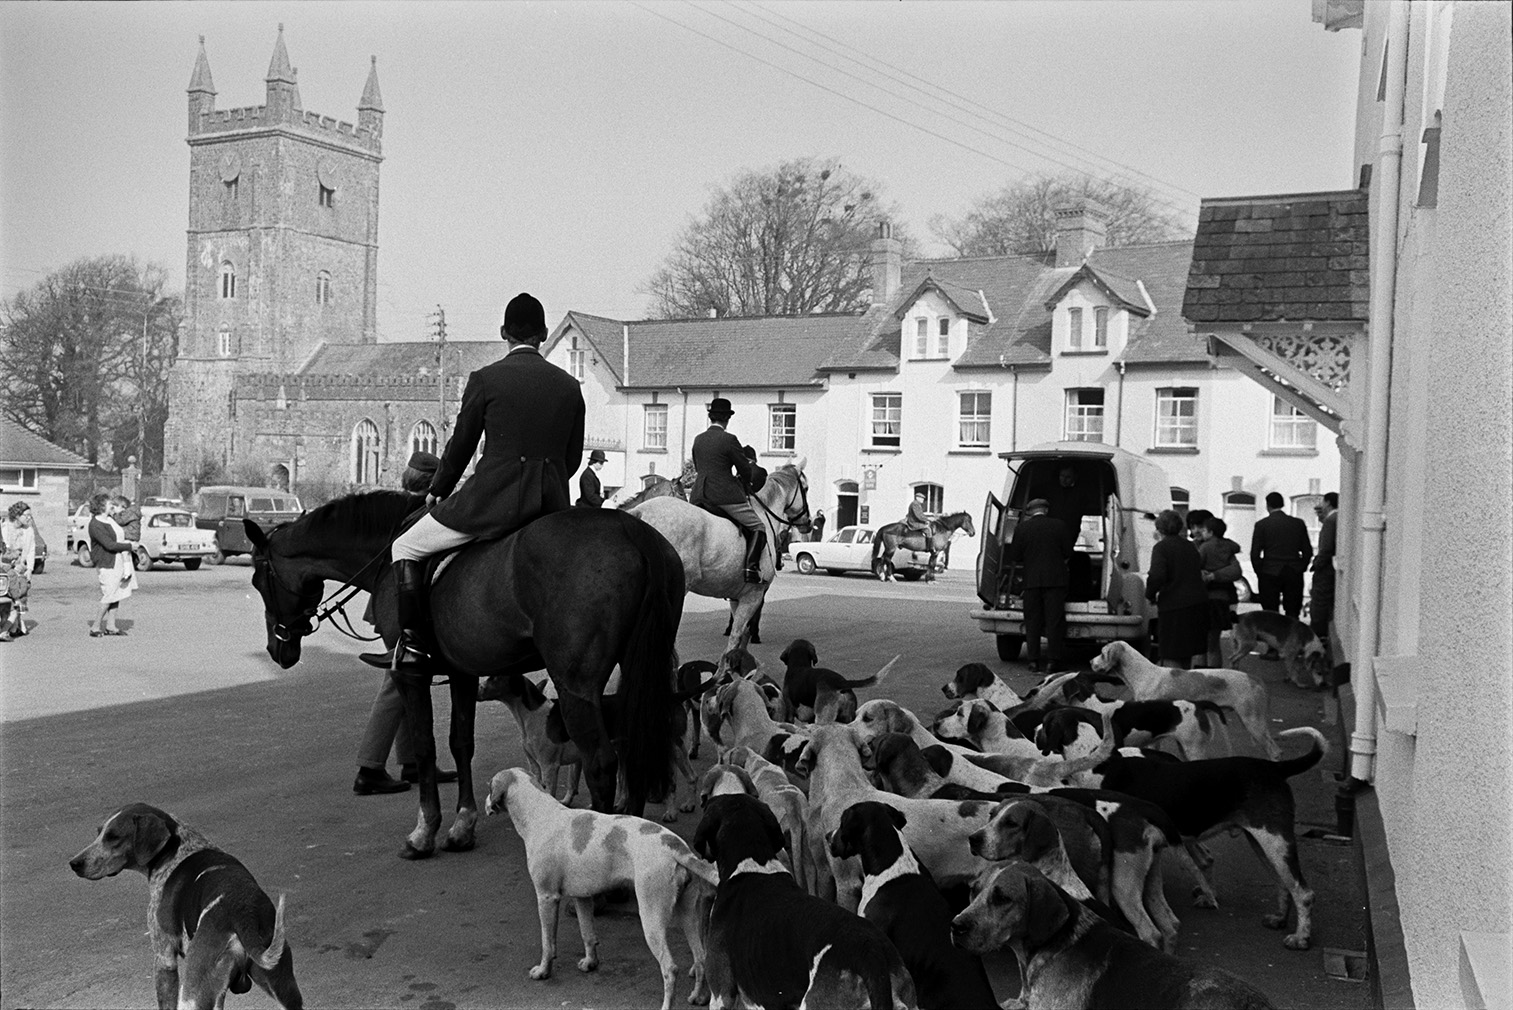 Tiverton Foxhounds hunt meet in the village square at Witheridge. Spectators have gathered to watch the mounted huntsmen and hounds. The Church and house can be seen in the background.